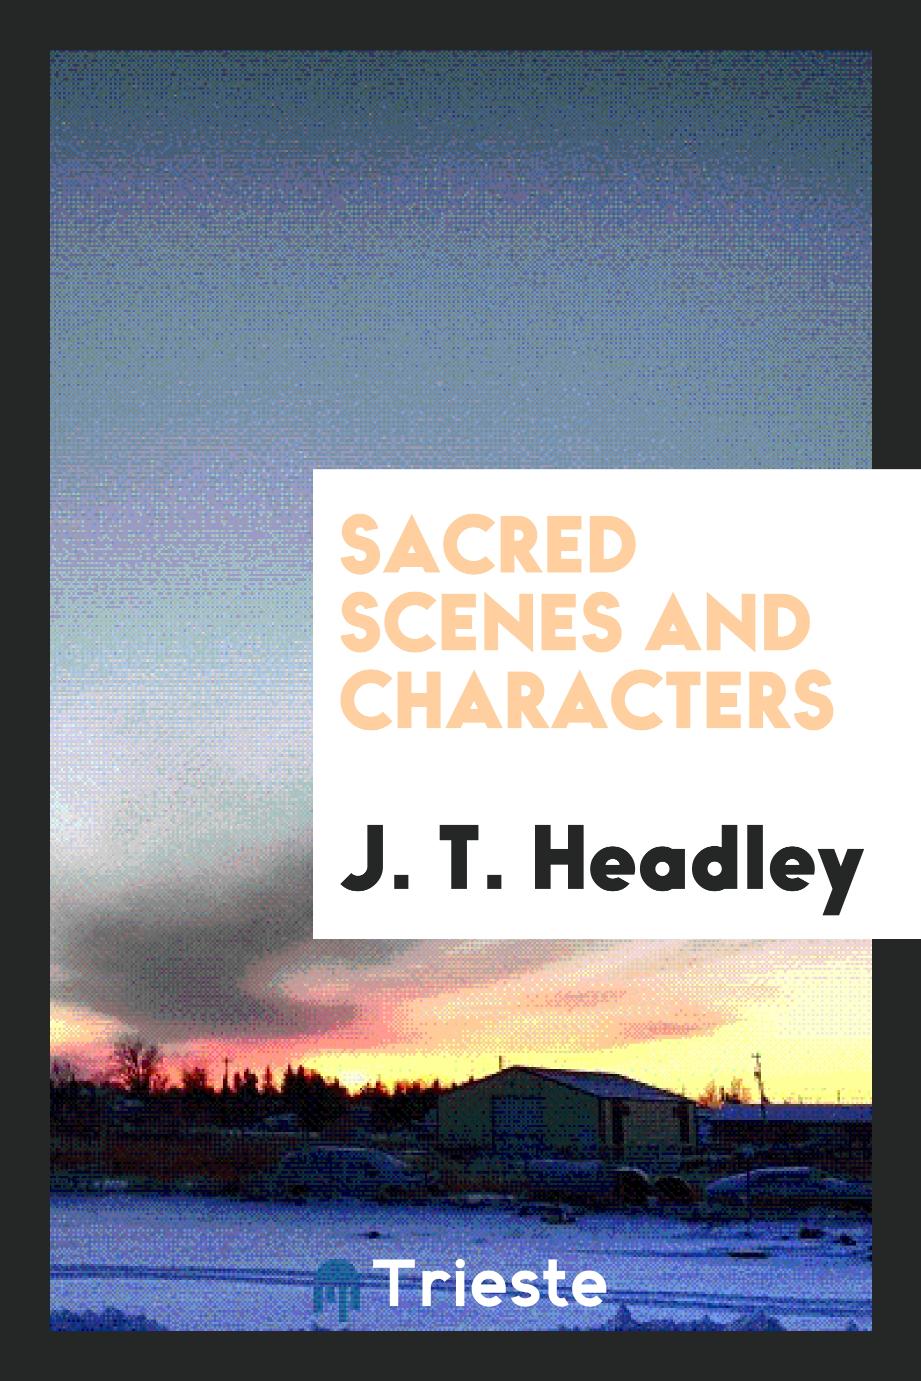 Sacred scenes and characters